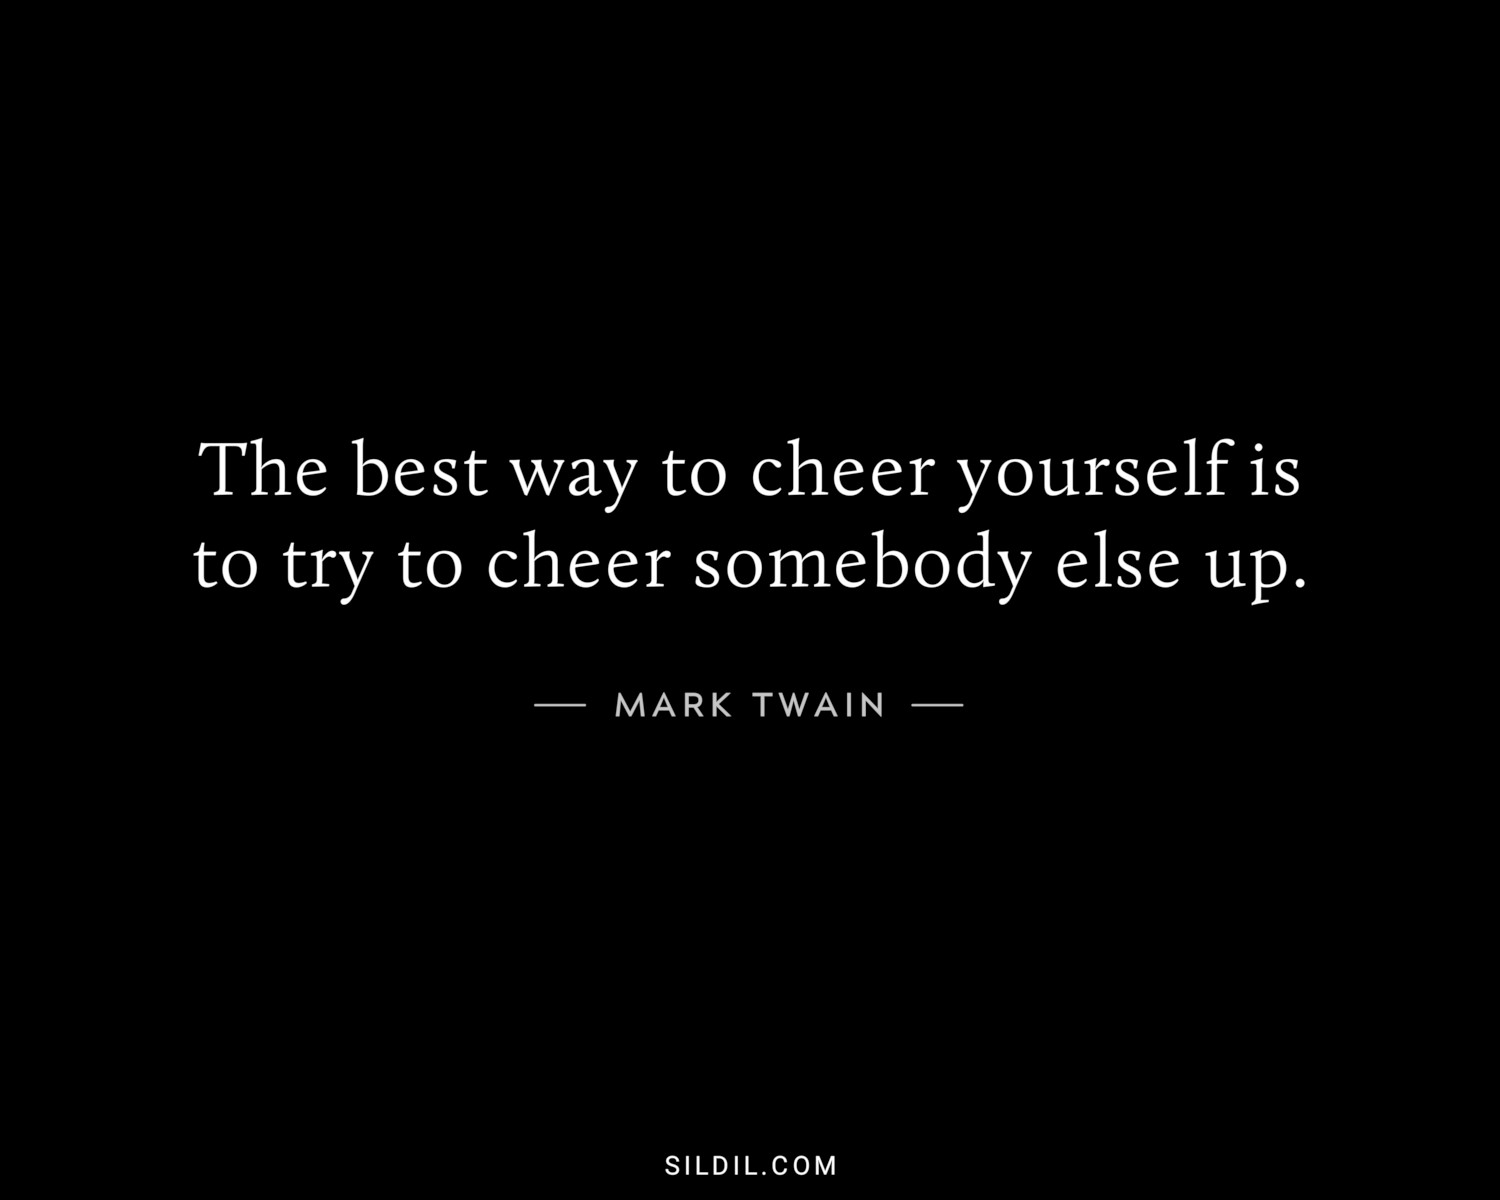 The best way to cheer yourself is to try to cheer somebody else up.